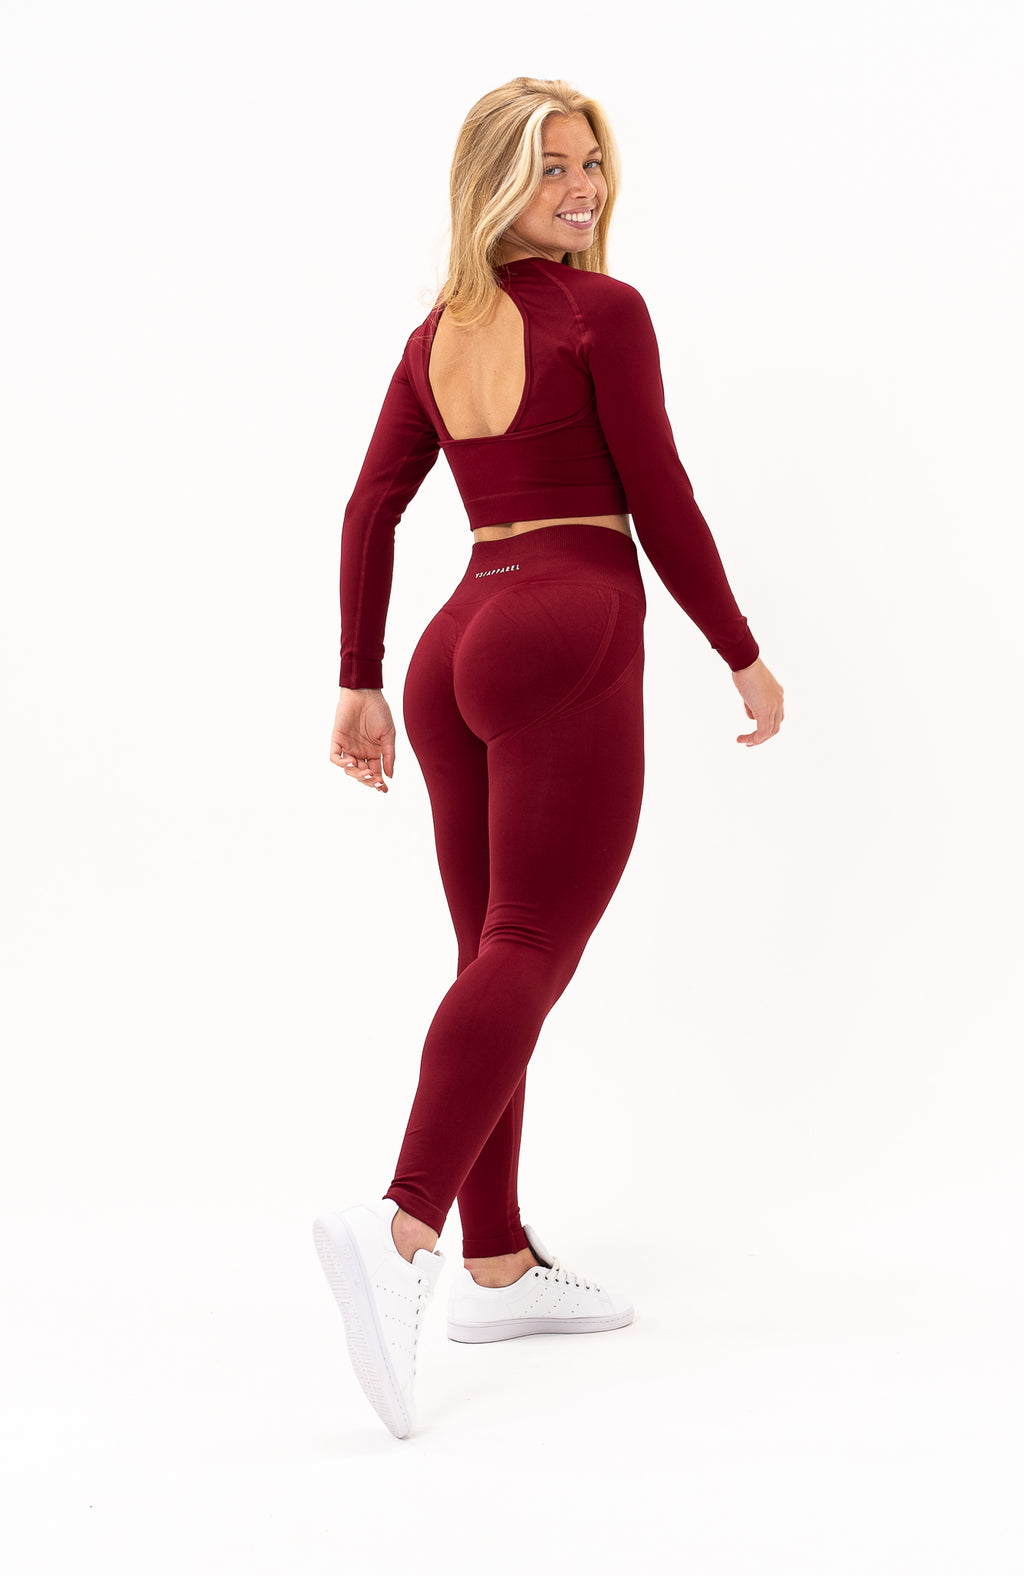 V3 Apparel Womens Tempo Seamless Scrunch Workout Leggings - Burgundy Red -  Gym, Running, Yoga Tights